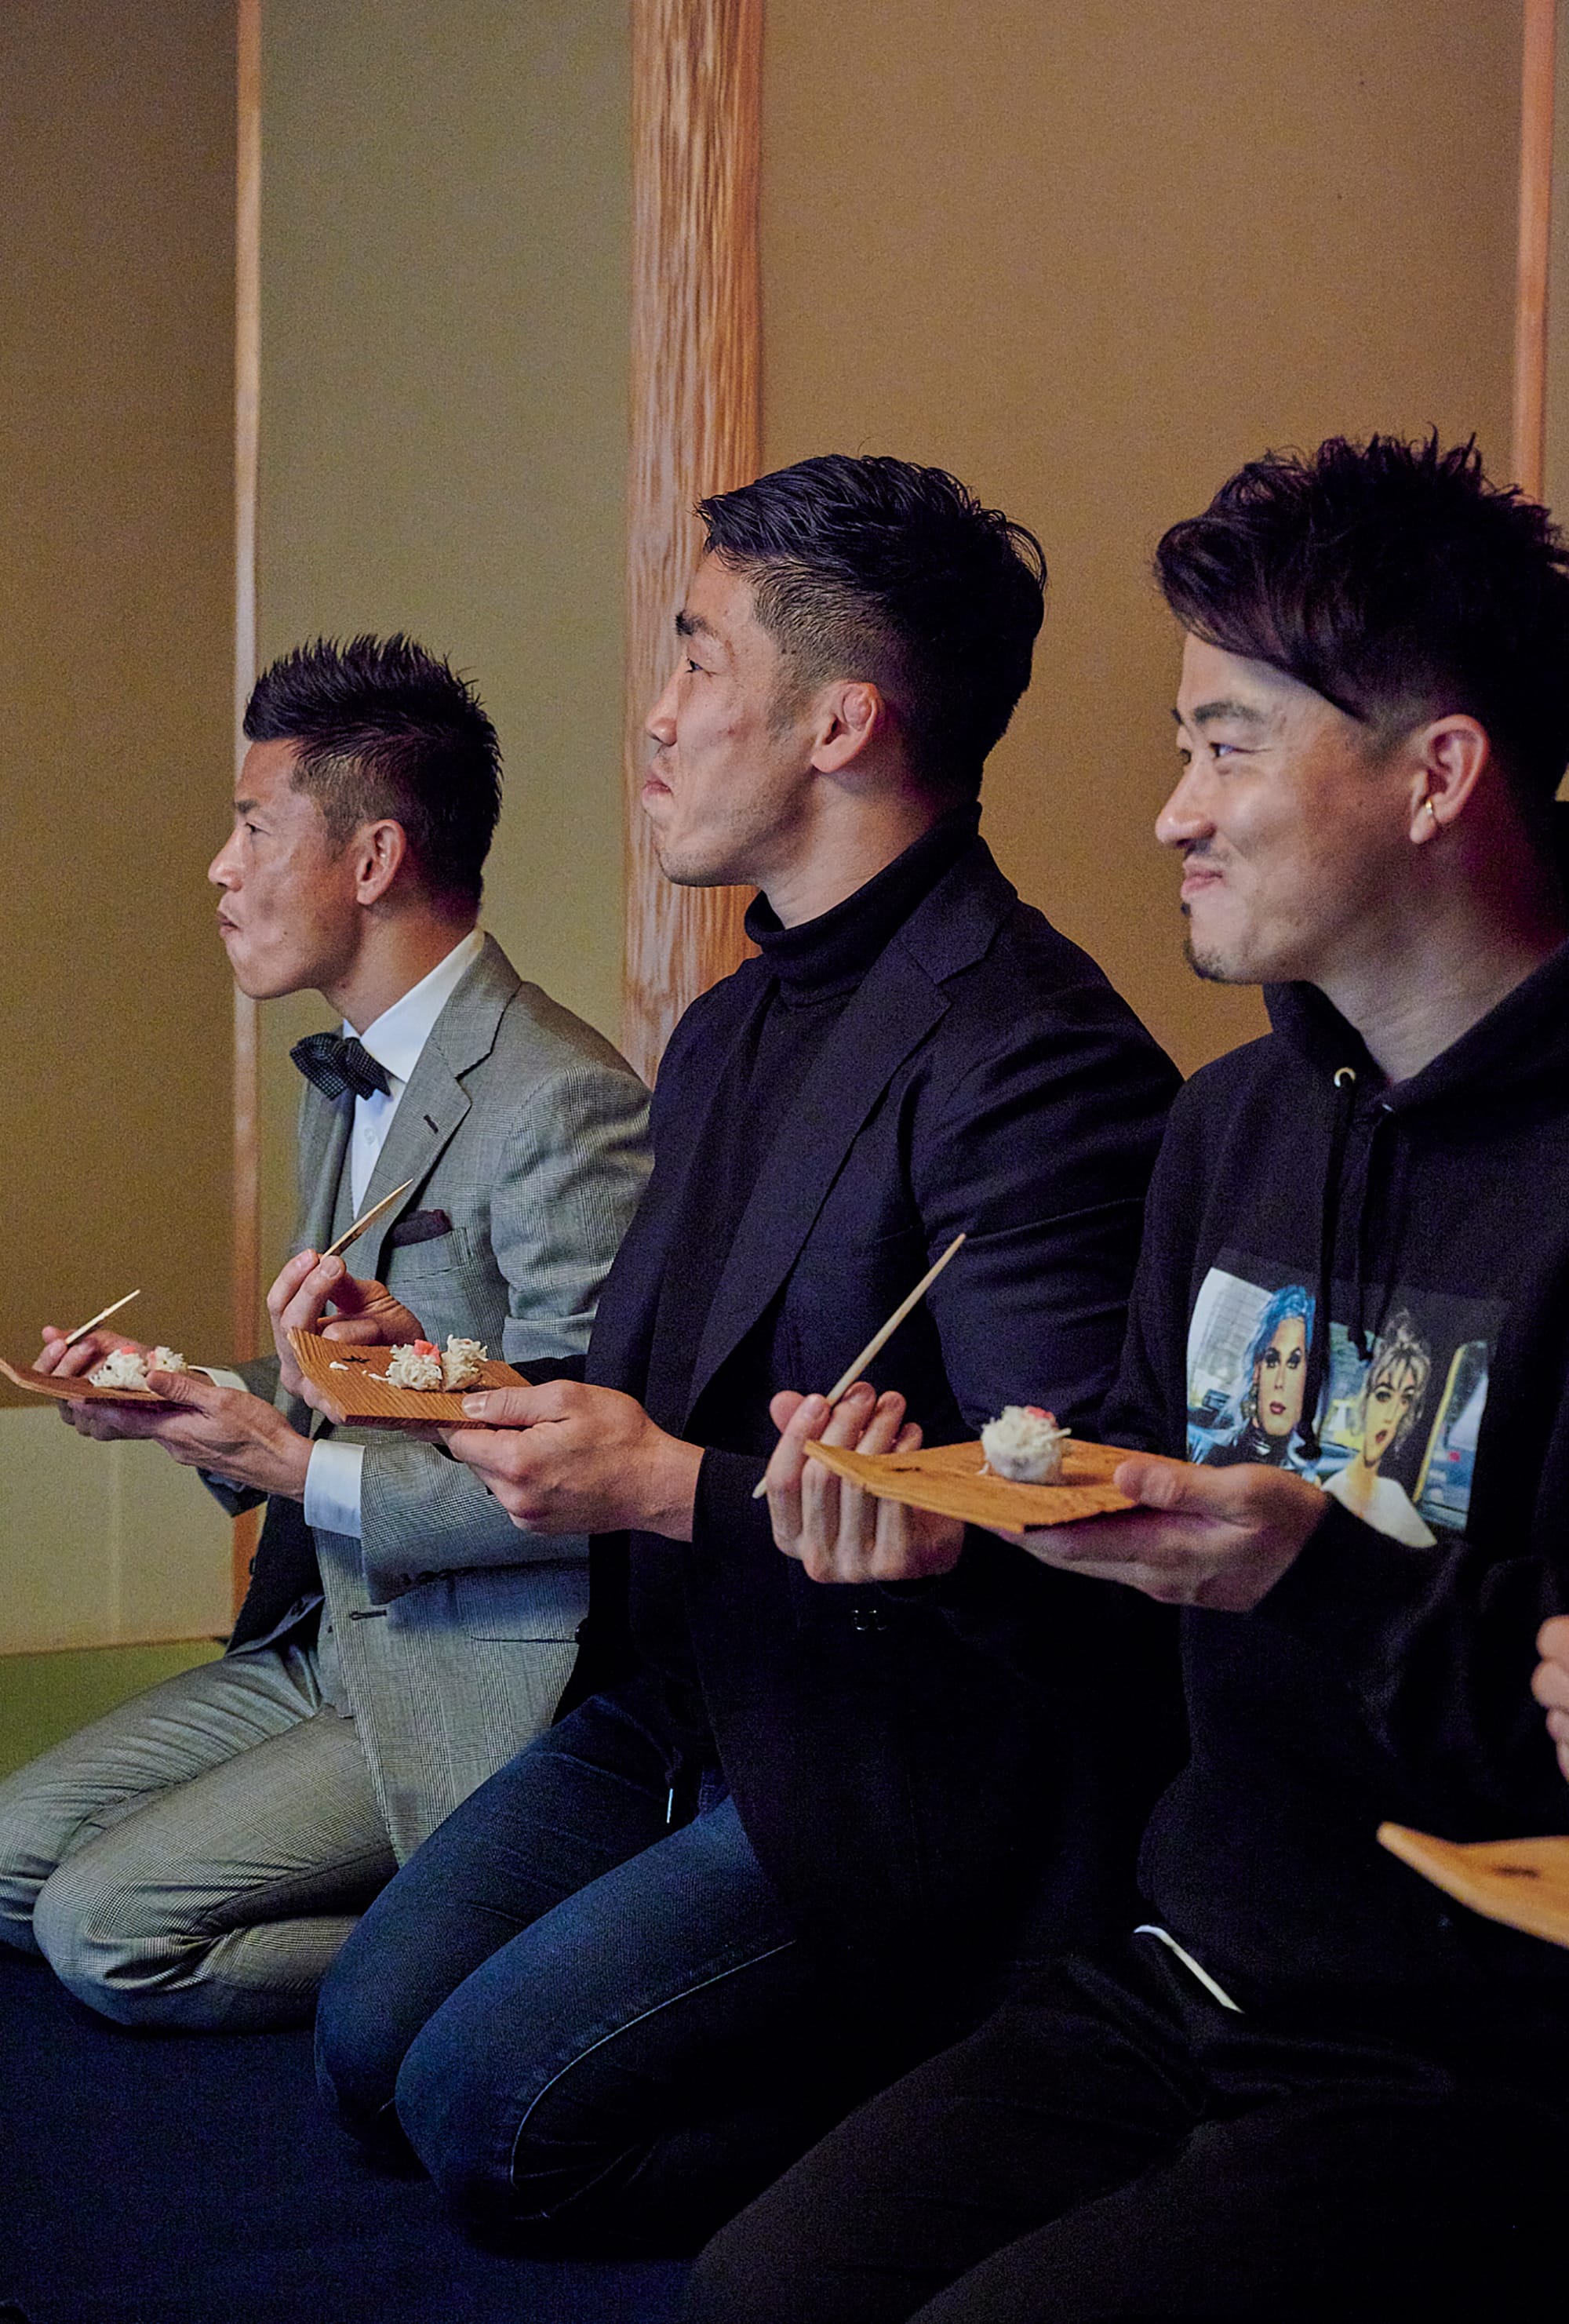 By the time the sweets appeared in front of the athletes, the atmosphere had become relaxed. From the left, Ryuji Bando, Shokei Kin and Shingo Maeda.